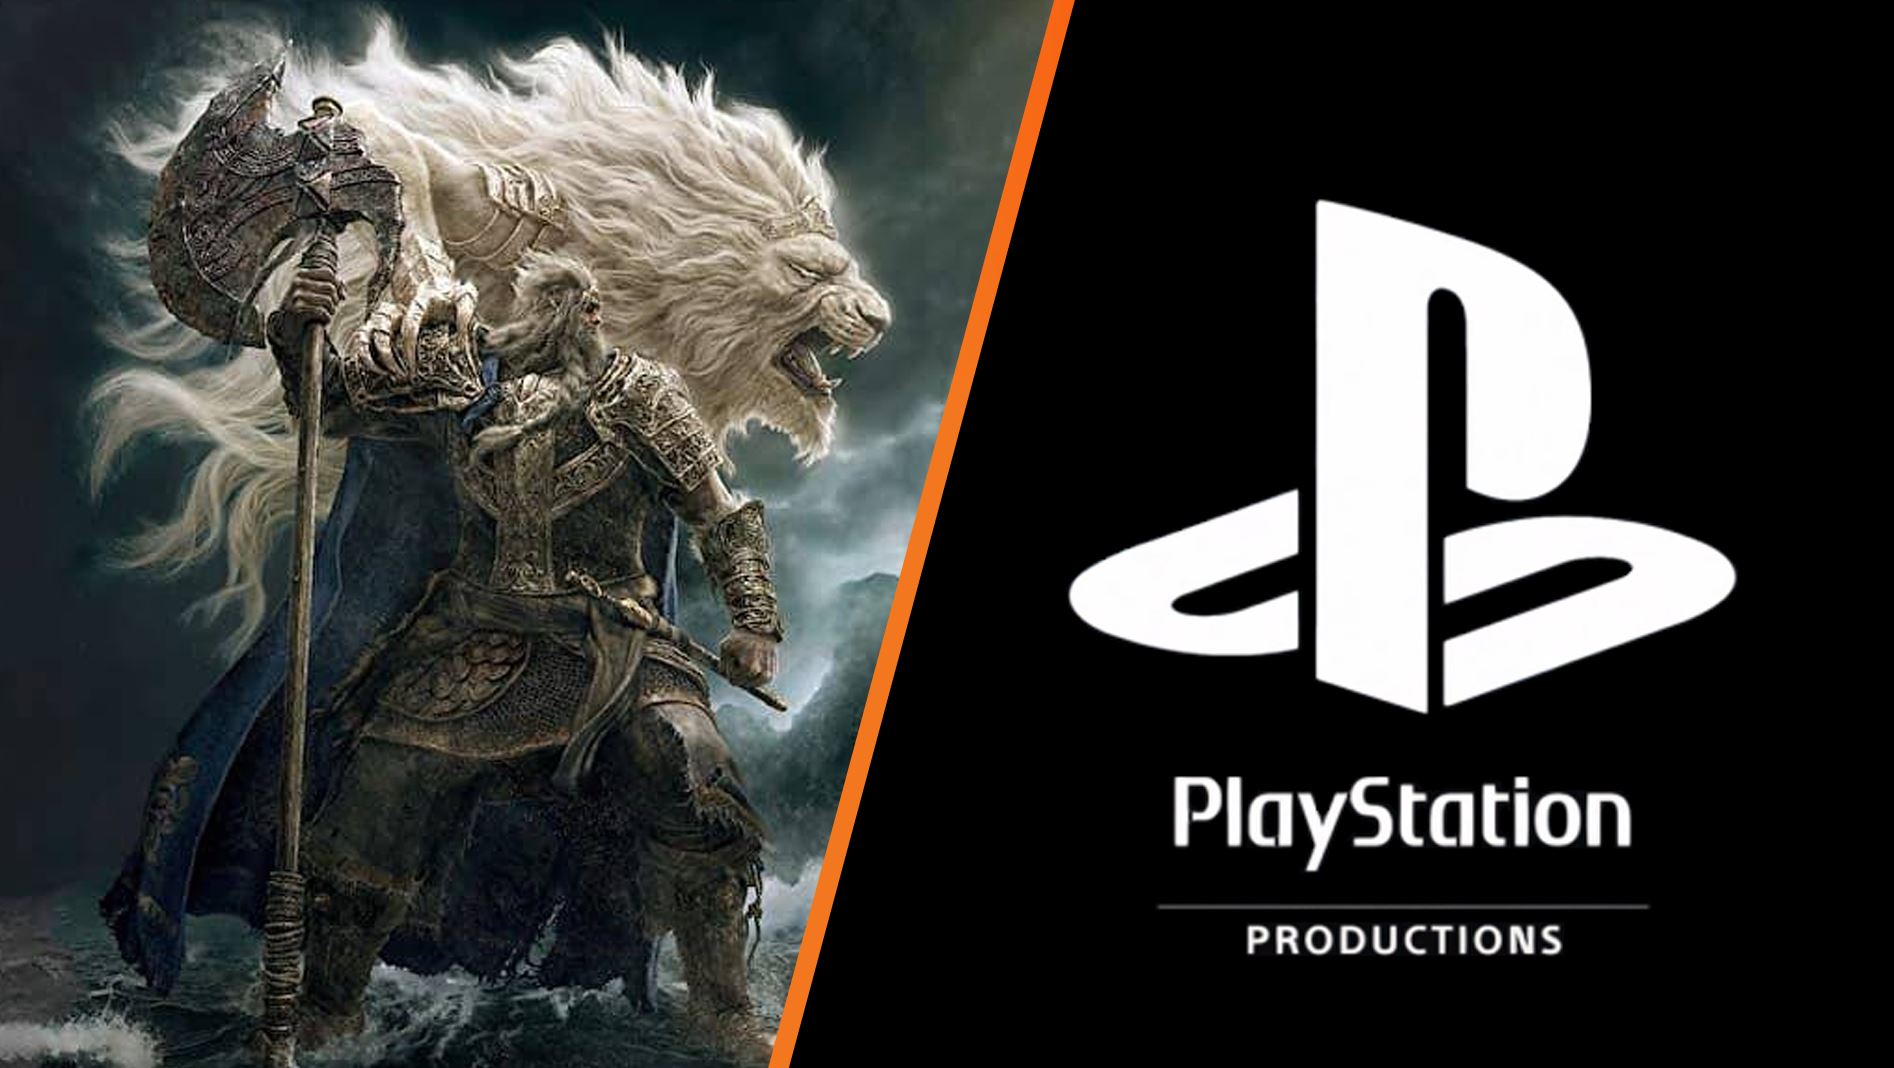 PlayStation Games developed by FromSoftware